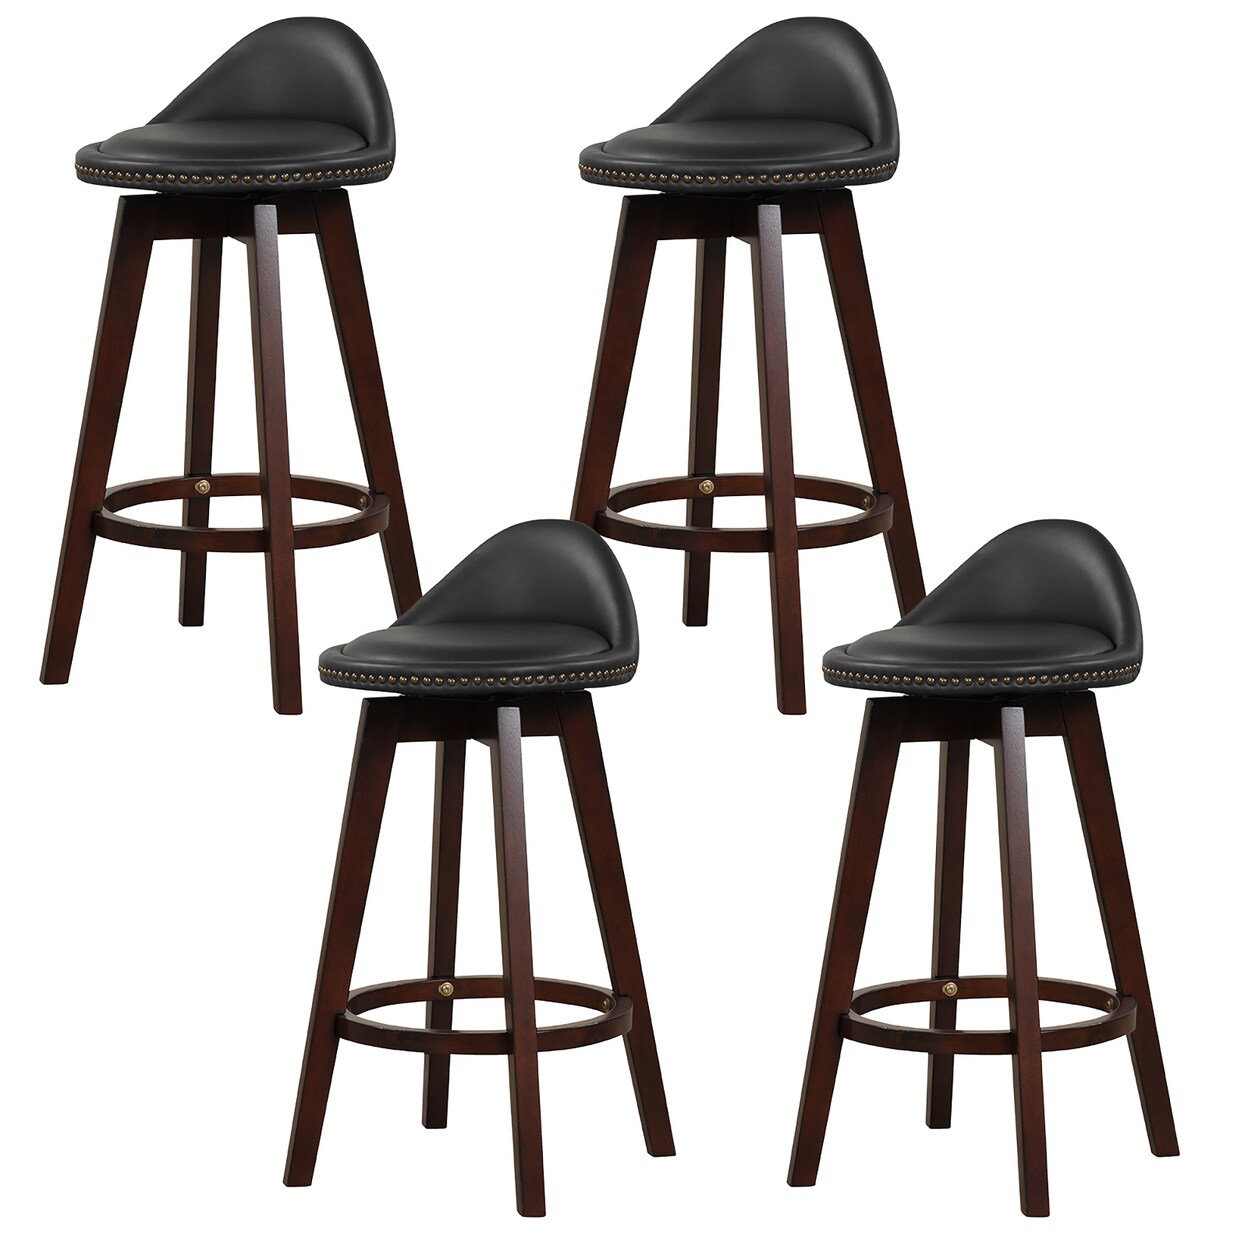 Gymax Set of 4 Swivel Bar Stools 29 Bar Height Stools w/ PVC Leather Cover Black